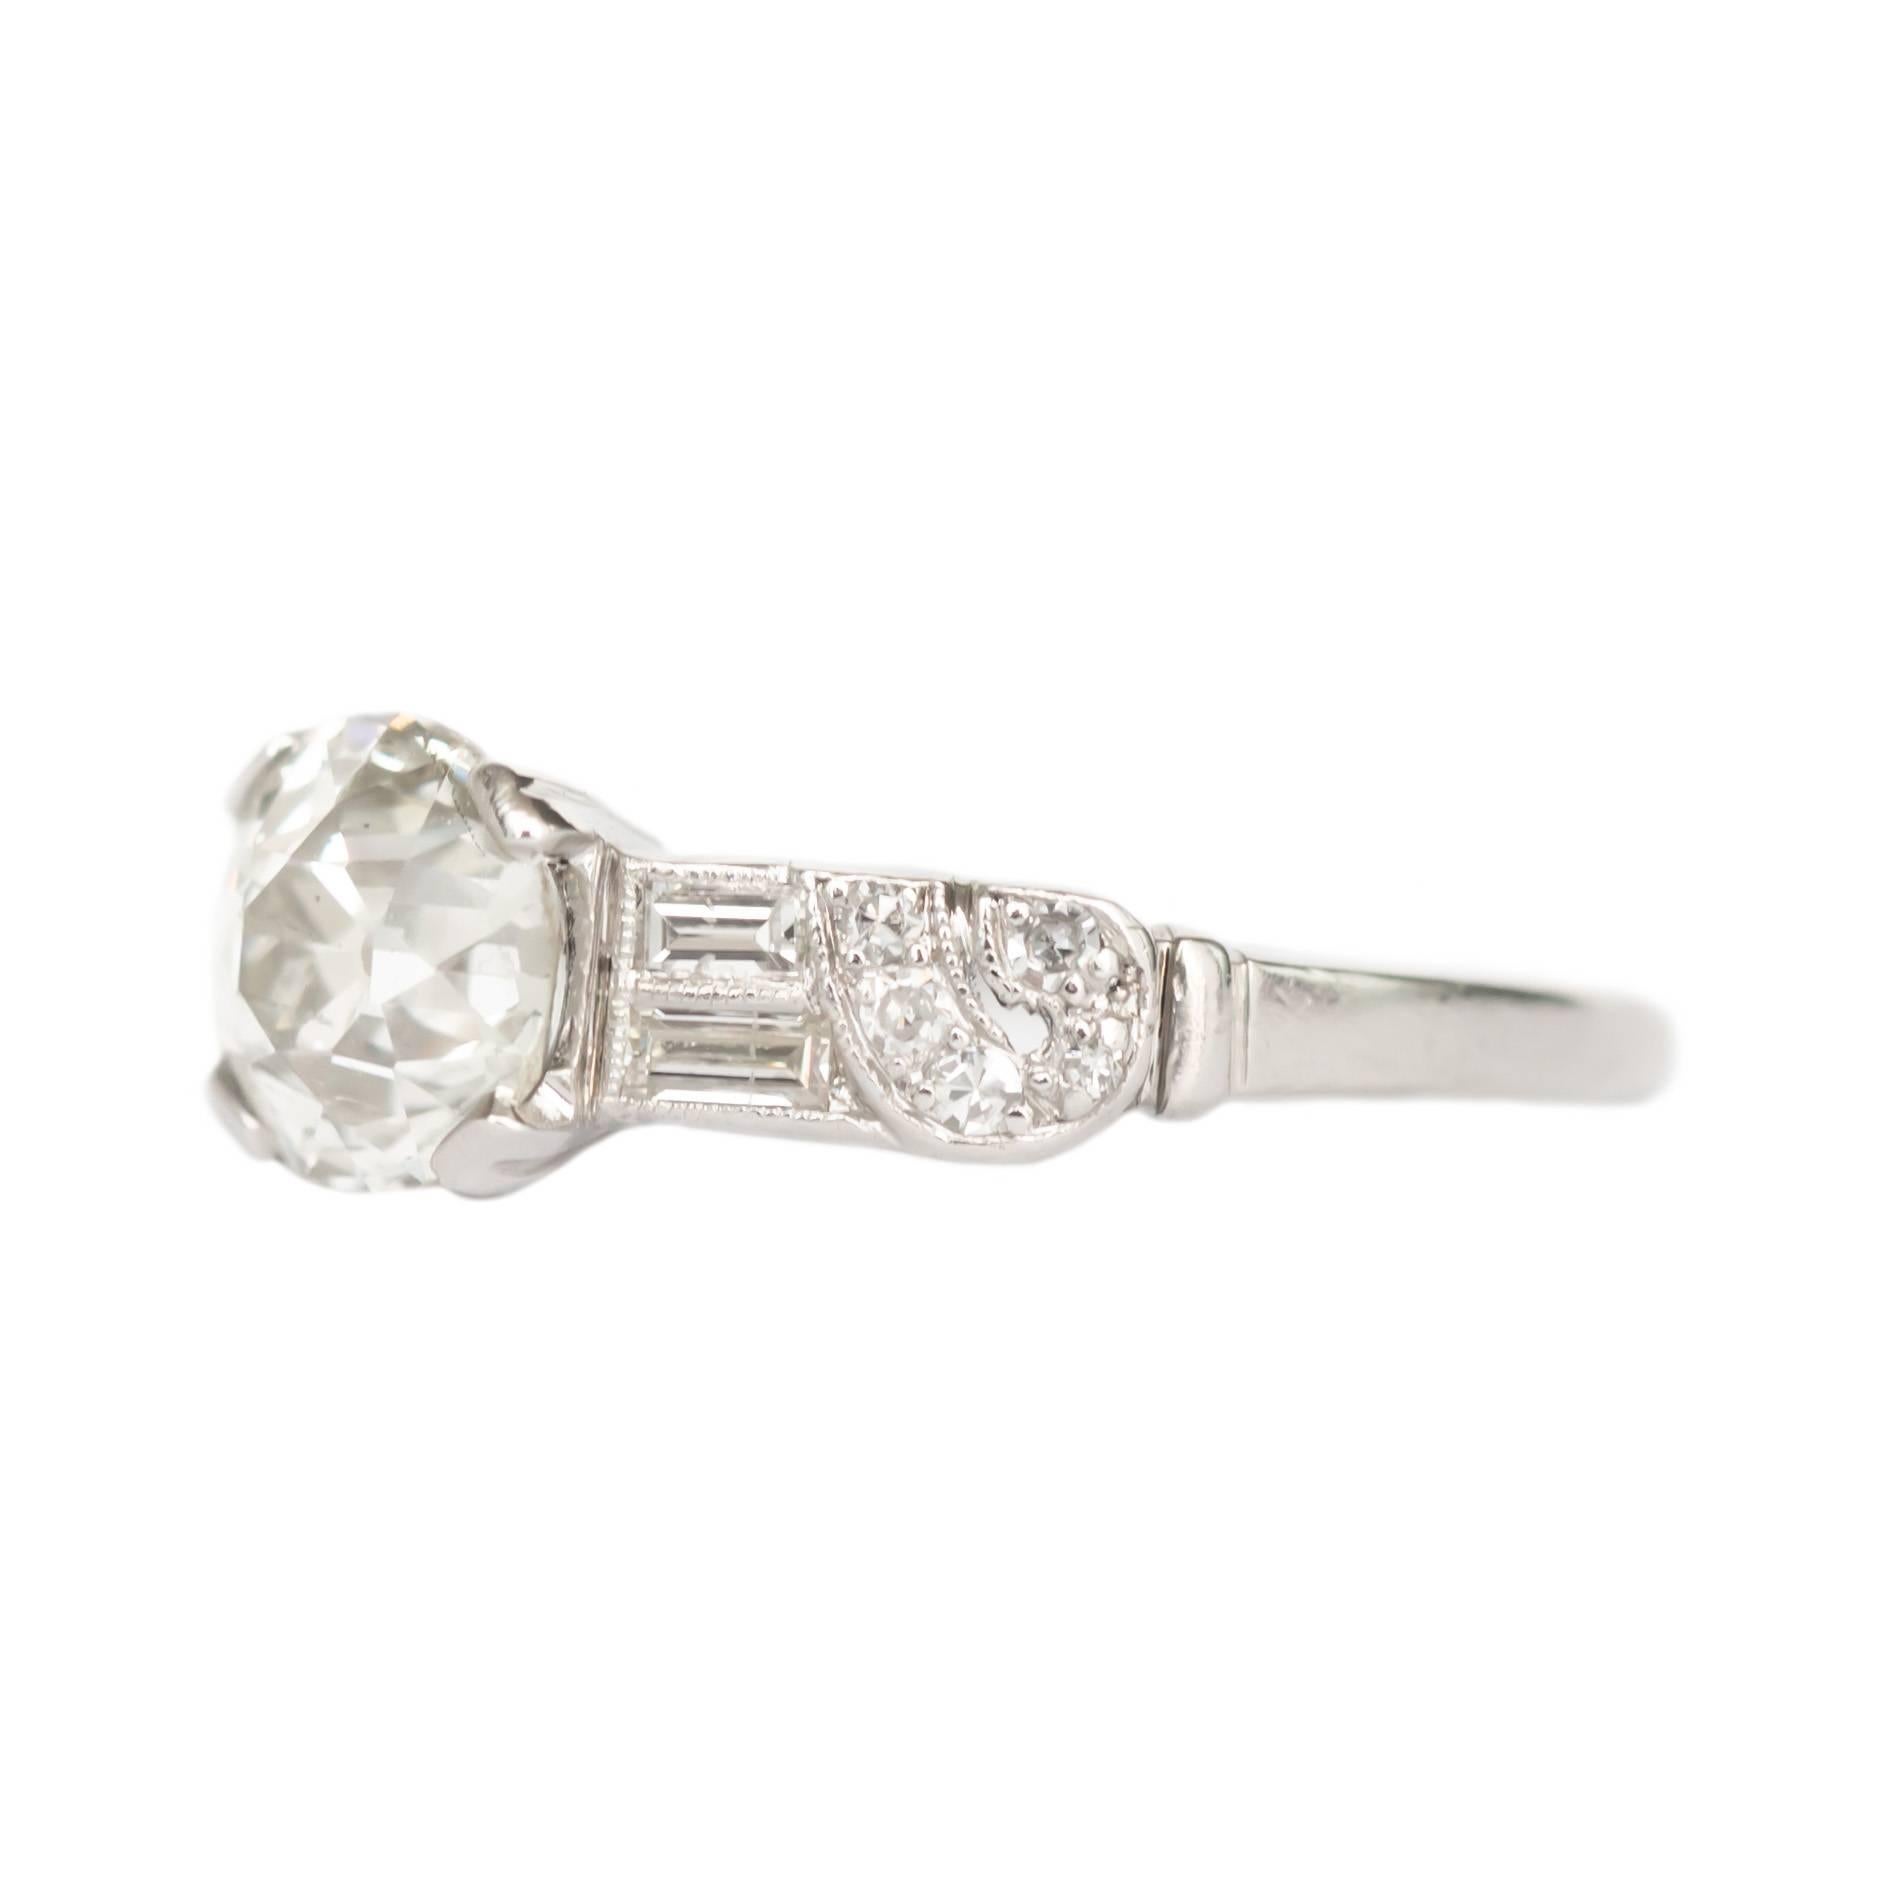 Item Details: 
Ring Size: 6
Metal Type: Platinum 
Weight: 2.9 grams

Center Diamond Details
Shape: Old European 
Carat Weight: 1.13 carat
Color: I
Clarity: SI2

Side Stone Details: 
Shape: Antique Single Cut and Antique Straight Baguette 
Total